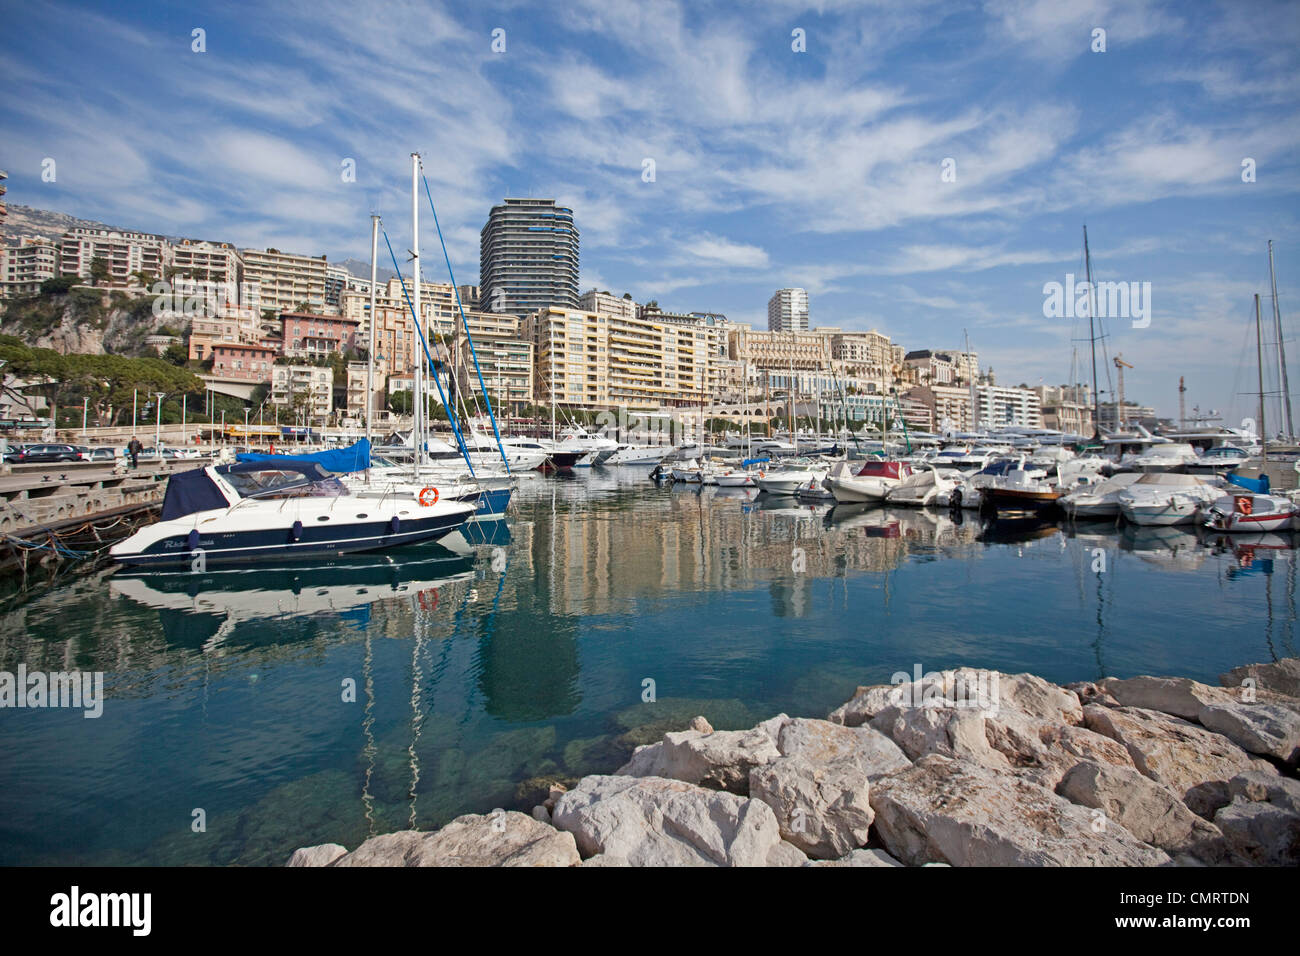 general view of Monaco & high rise buildings of Monte Carlo marina with millionaires yachts 124692 Monaco Stock Photo